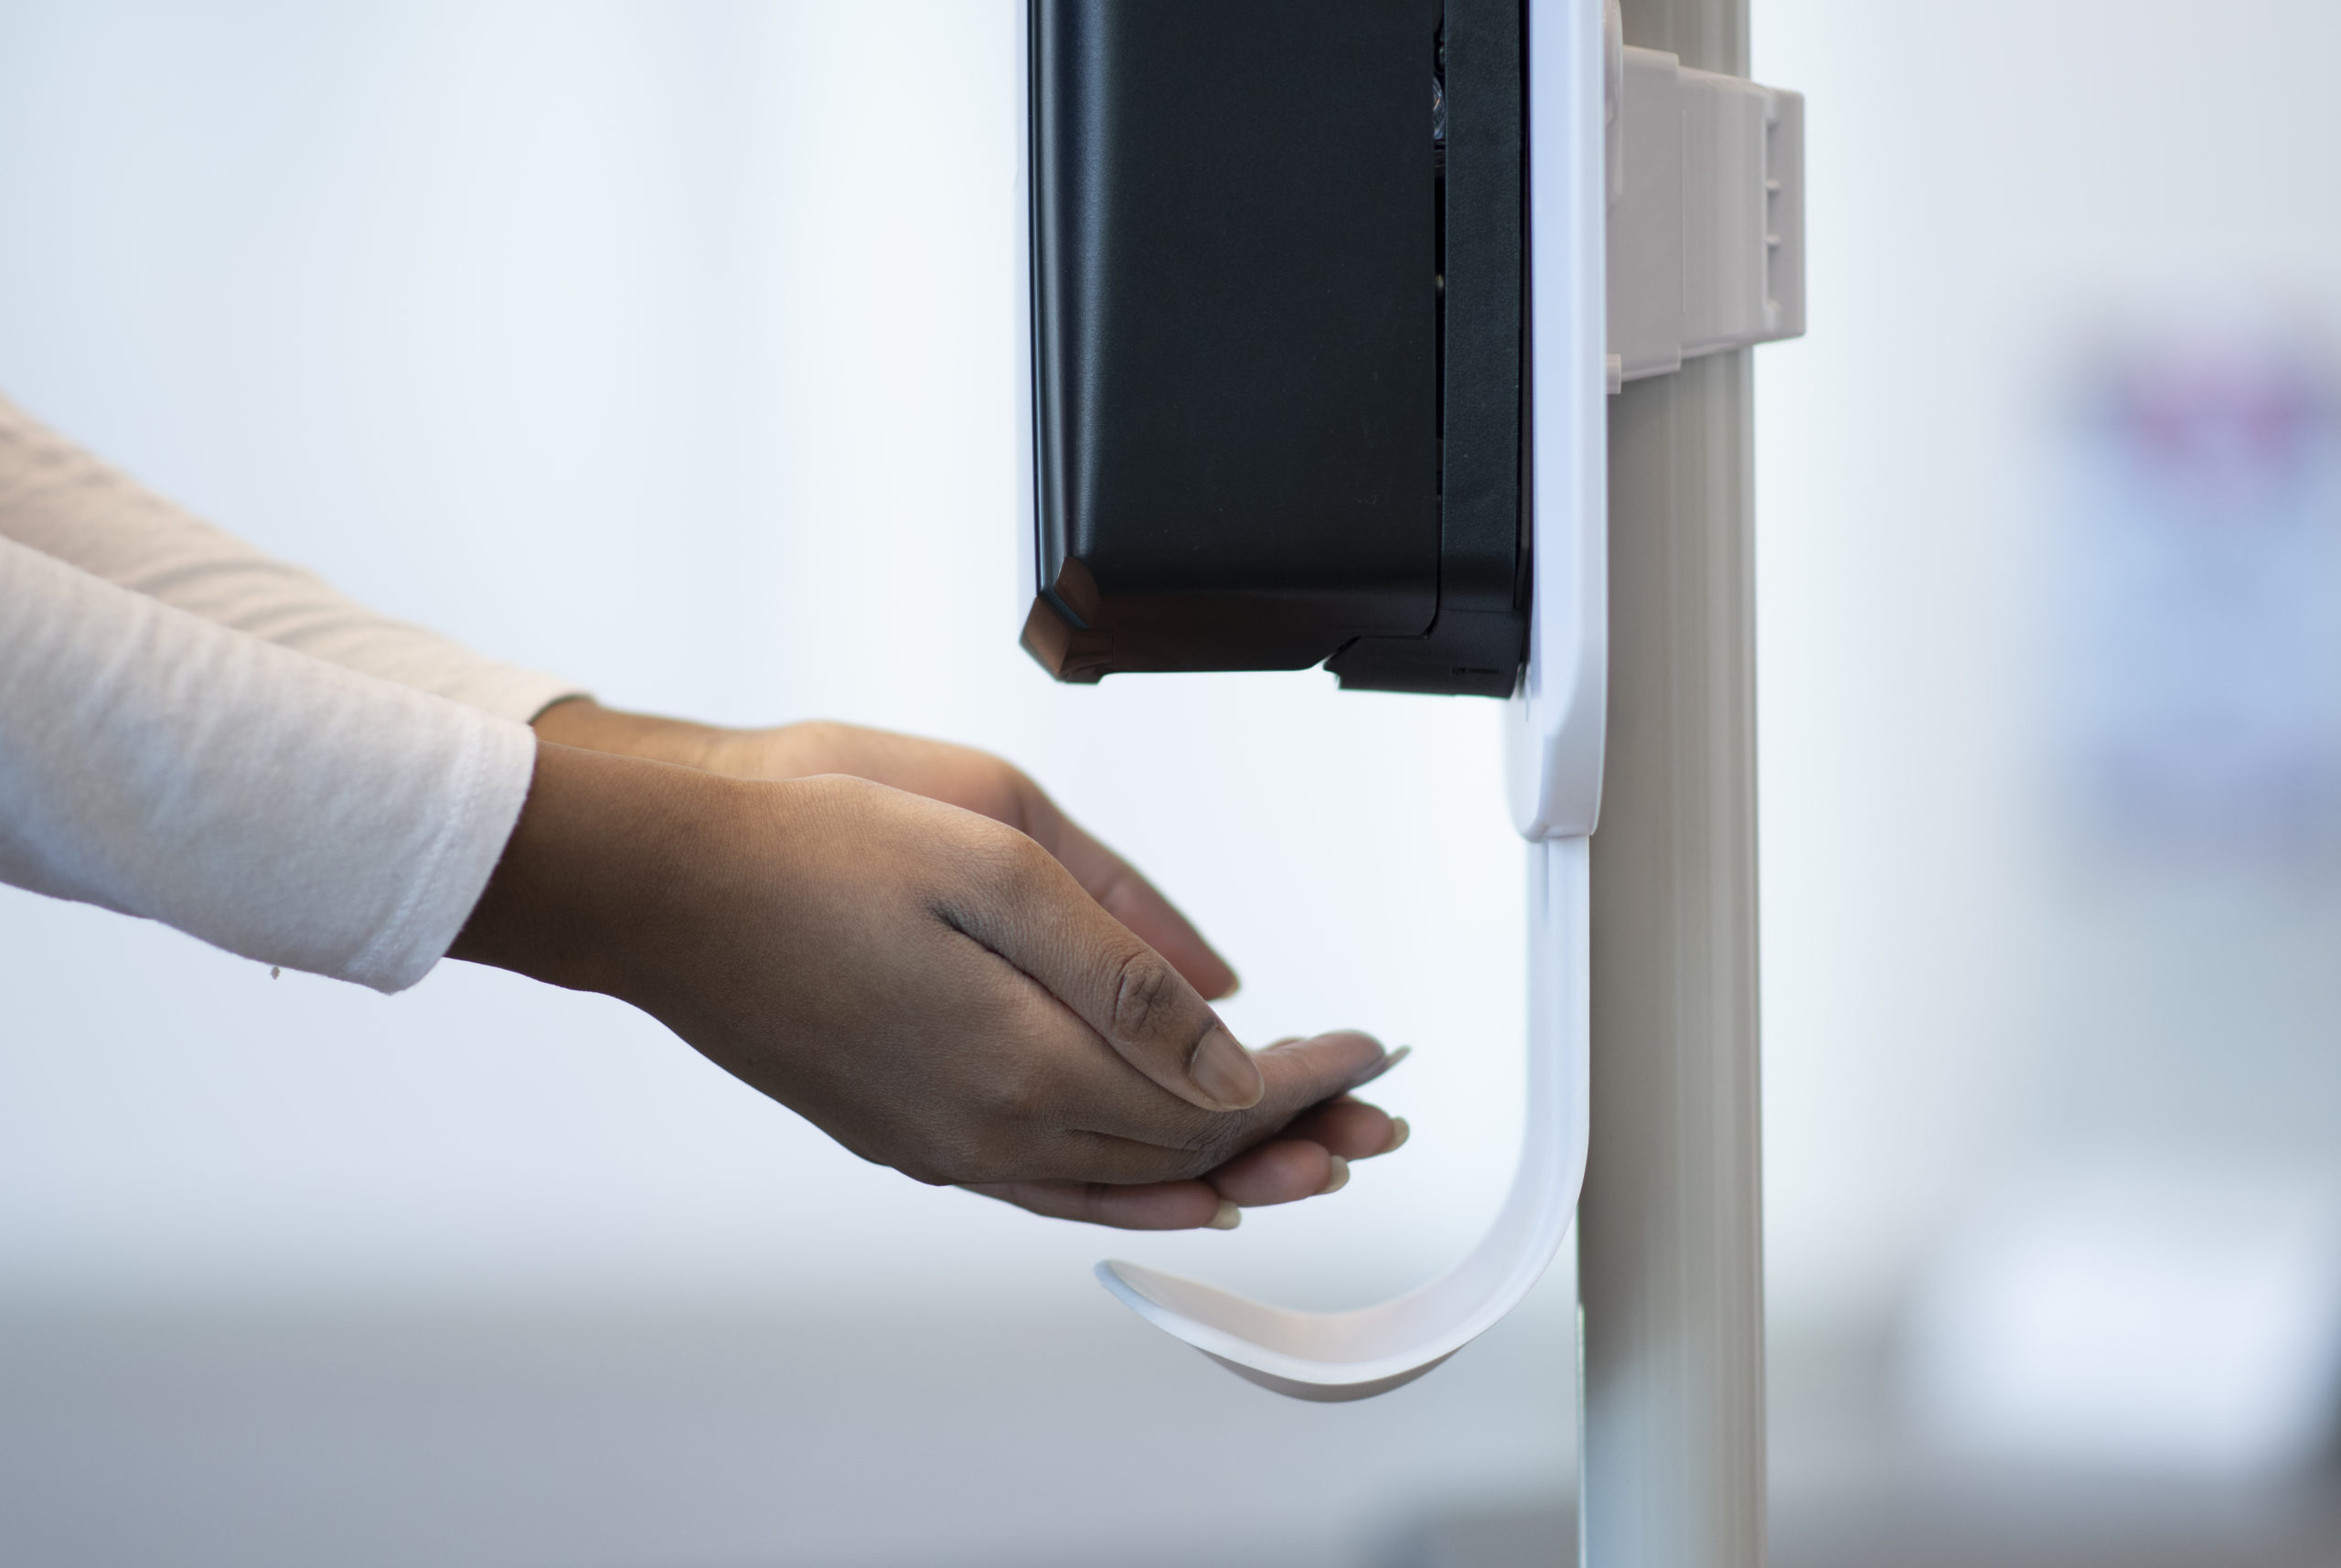 Female medical professional putting their hands under an automatic sanitizer dispenser at the hospital to ensure their hands are clean and germ free.